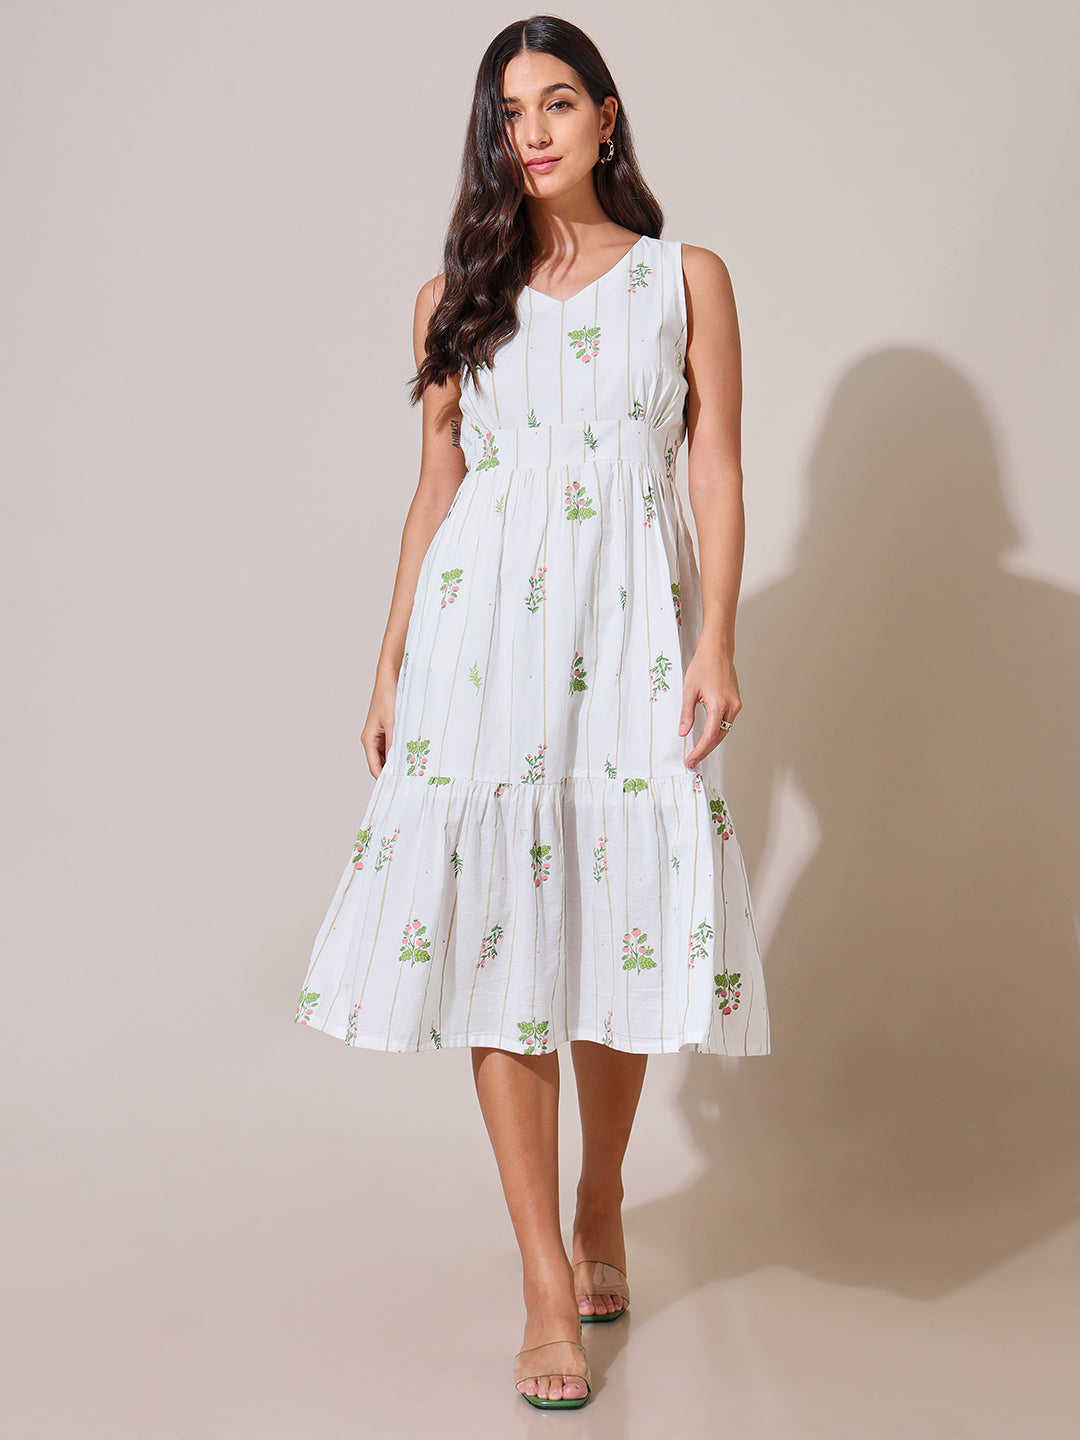 Herberium Floral Printed White Tiered Dress